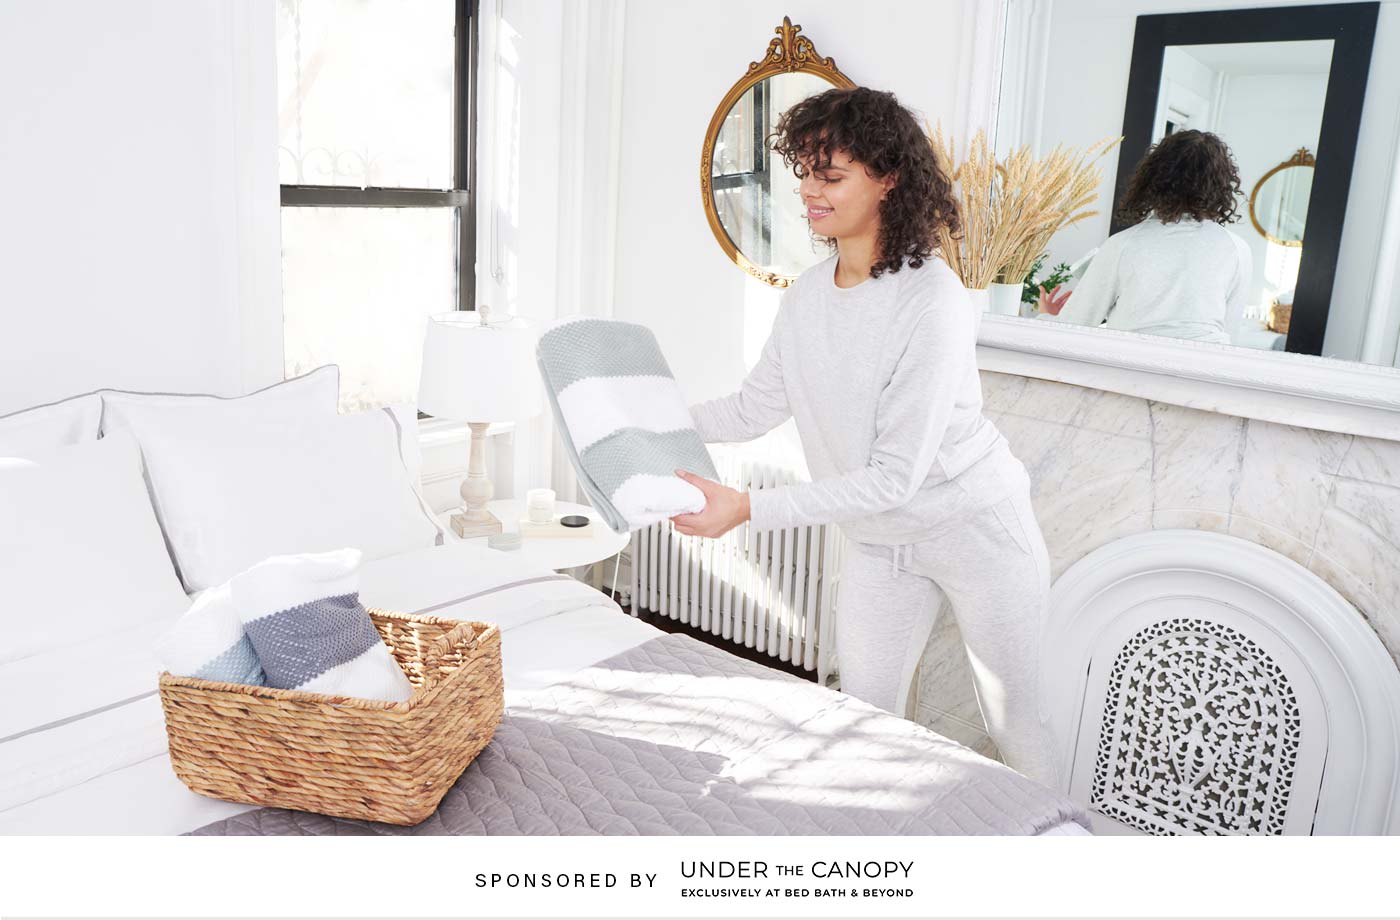 4 reasons to switch to organic linens because your bed deserves nice things, too